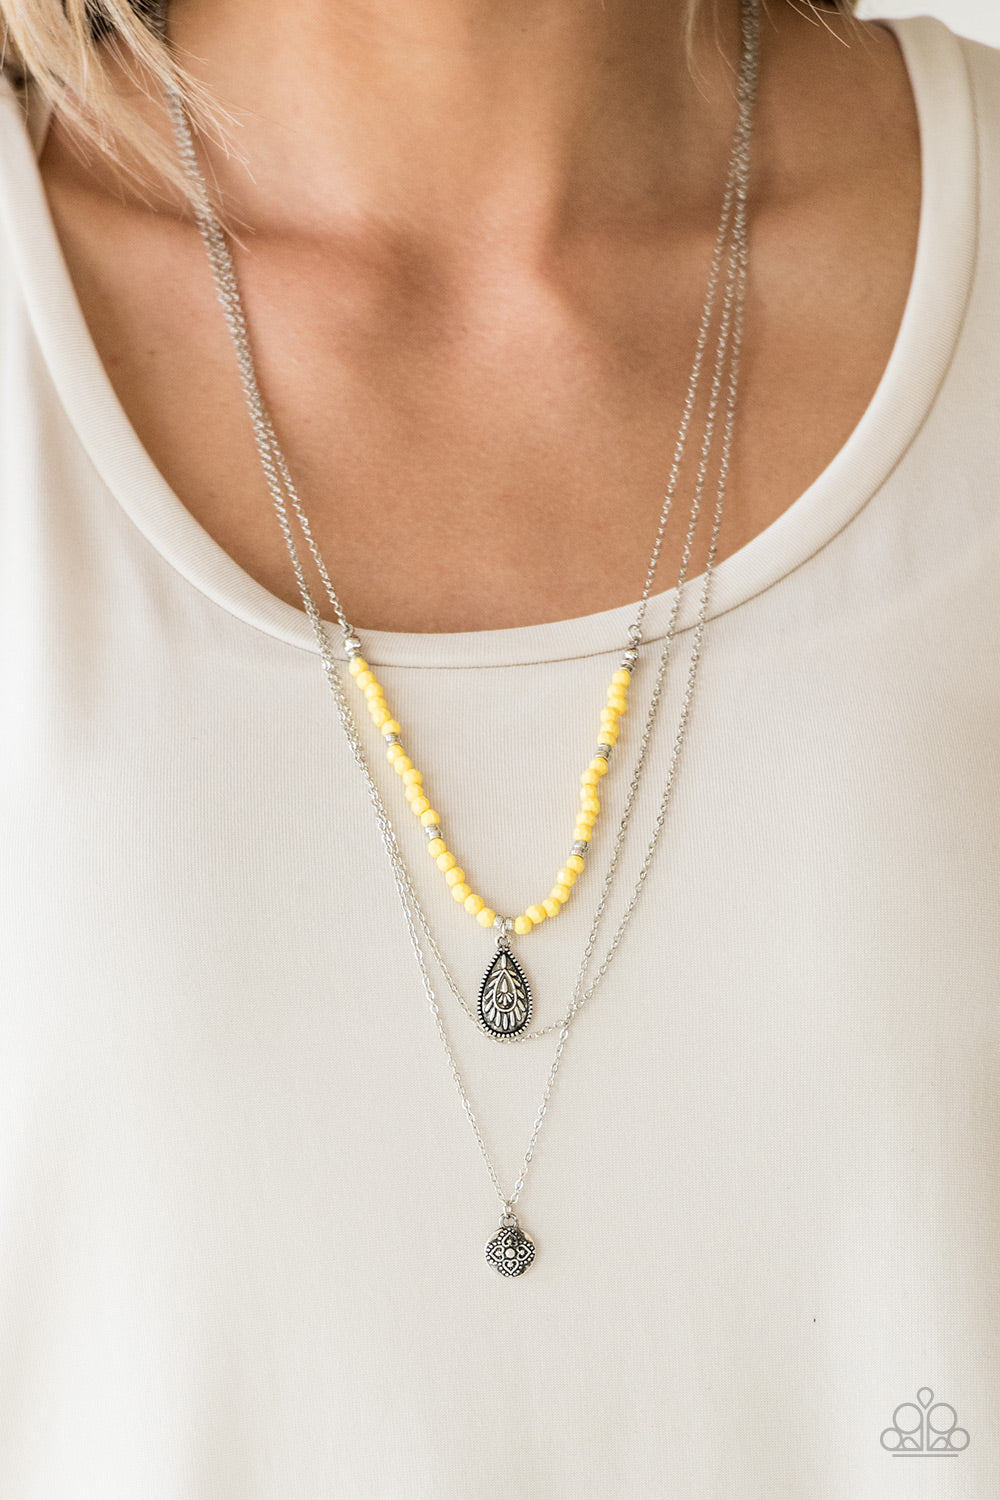 Mild Wild- Yellow and Silver Necklace- Paparazzi Accessories